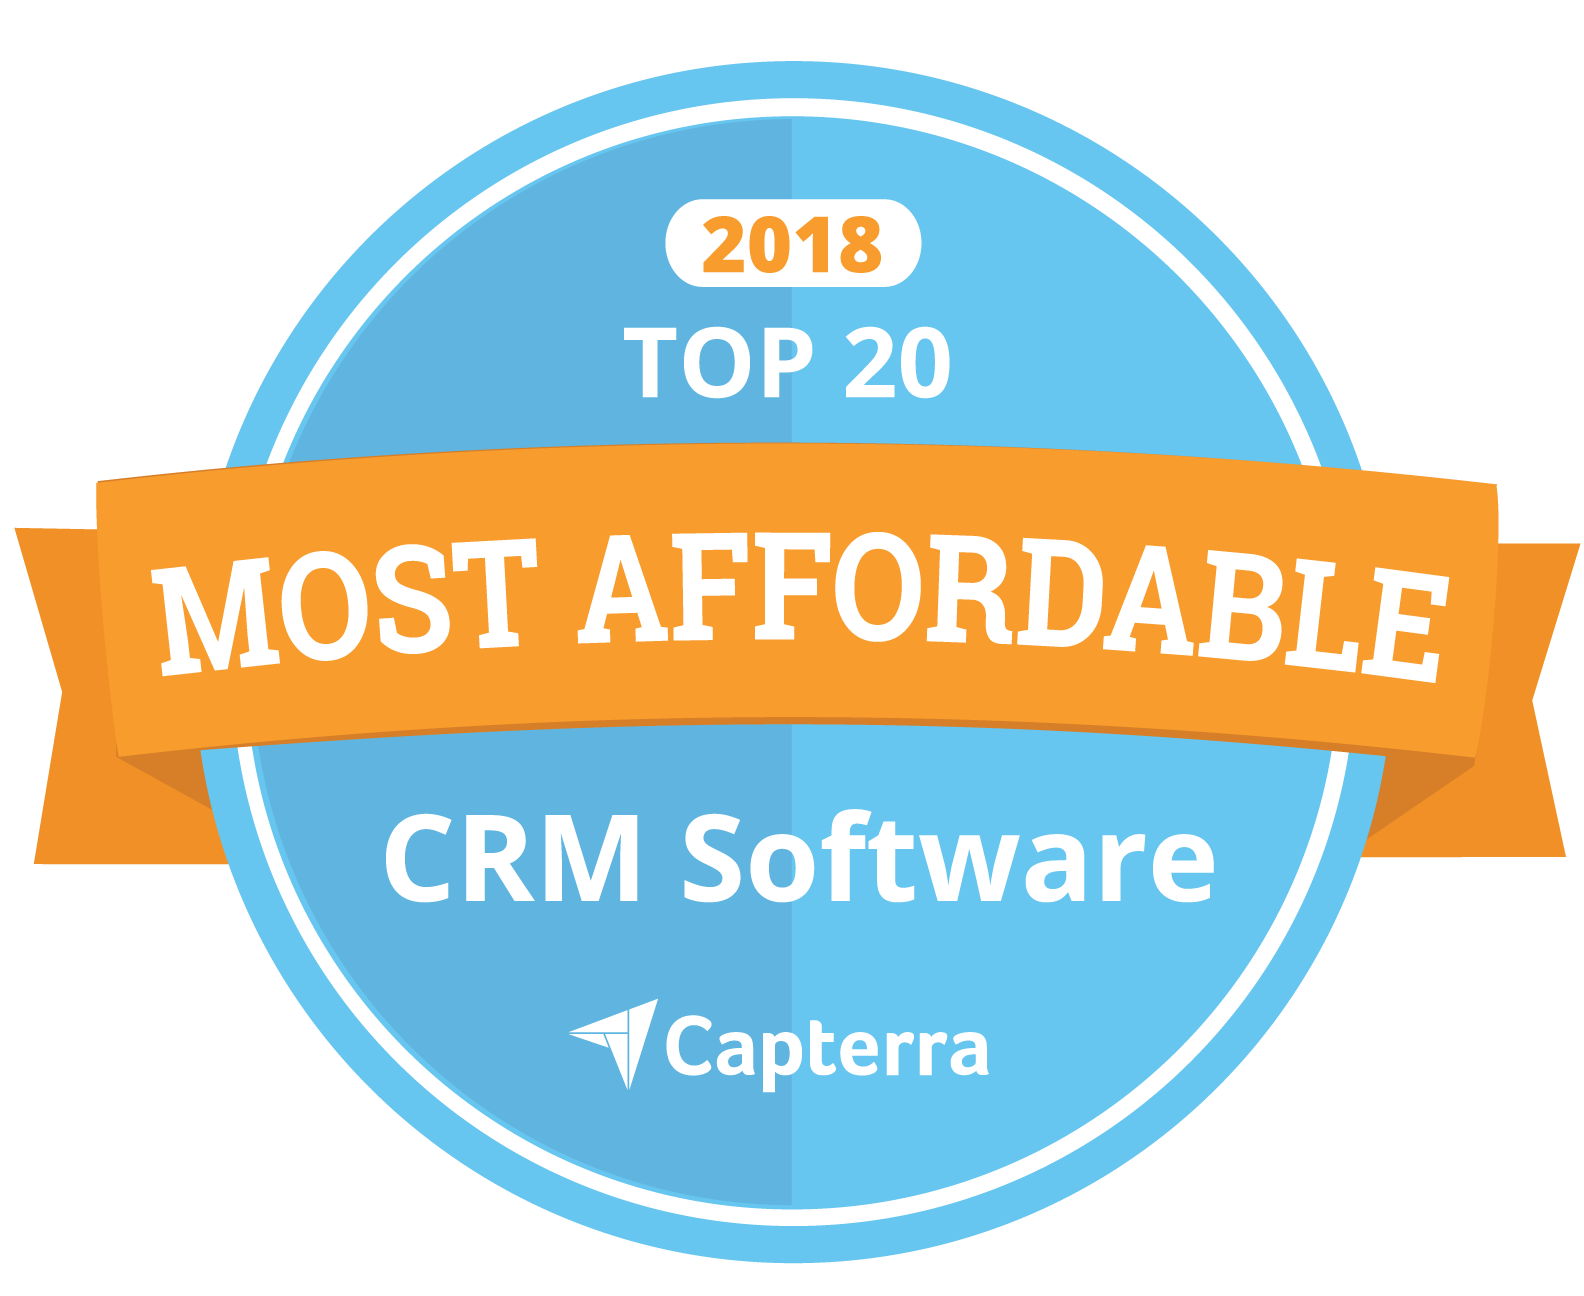 Top 20 Most Affordable CRM Software 2018